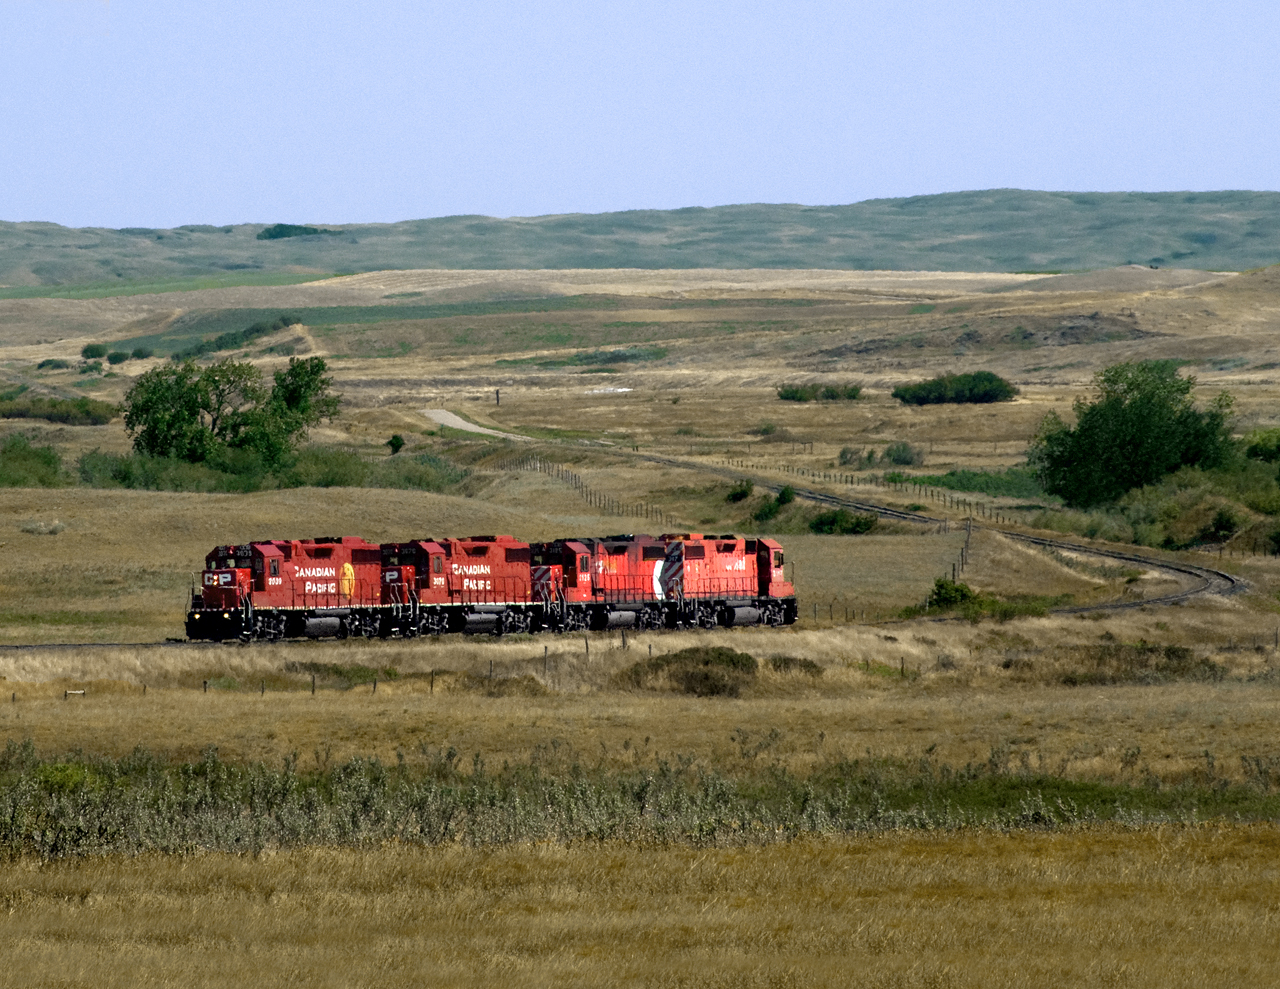 Light engines out of Moose Jaw bound for Mossbank to pick up grain loads off the Gravelbourg Subdivision cross the Cactus Hills